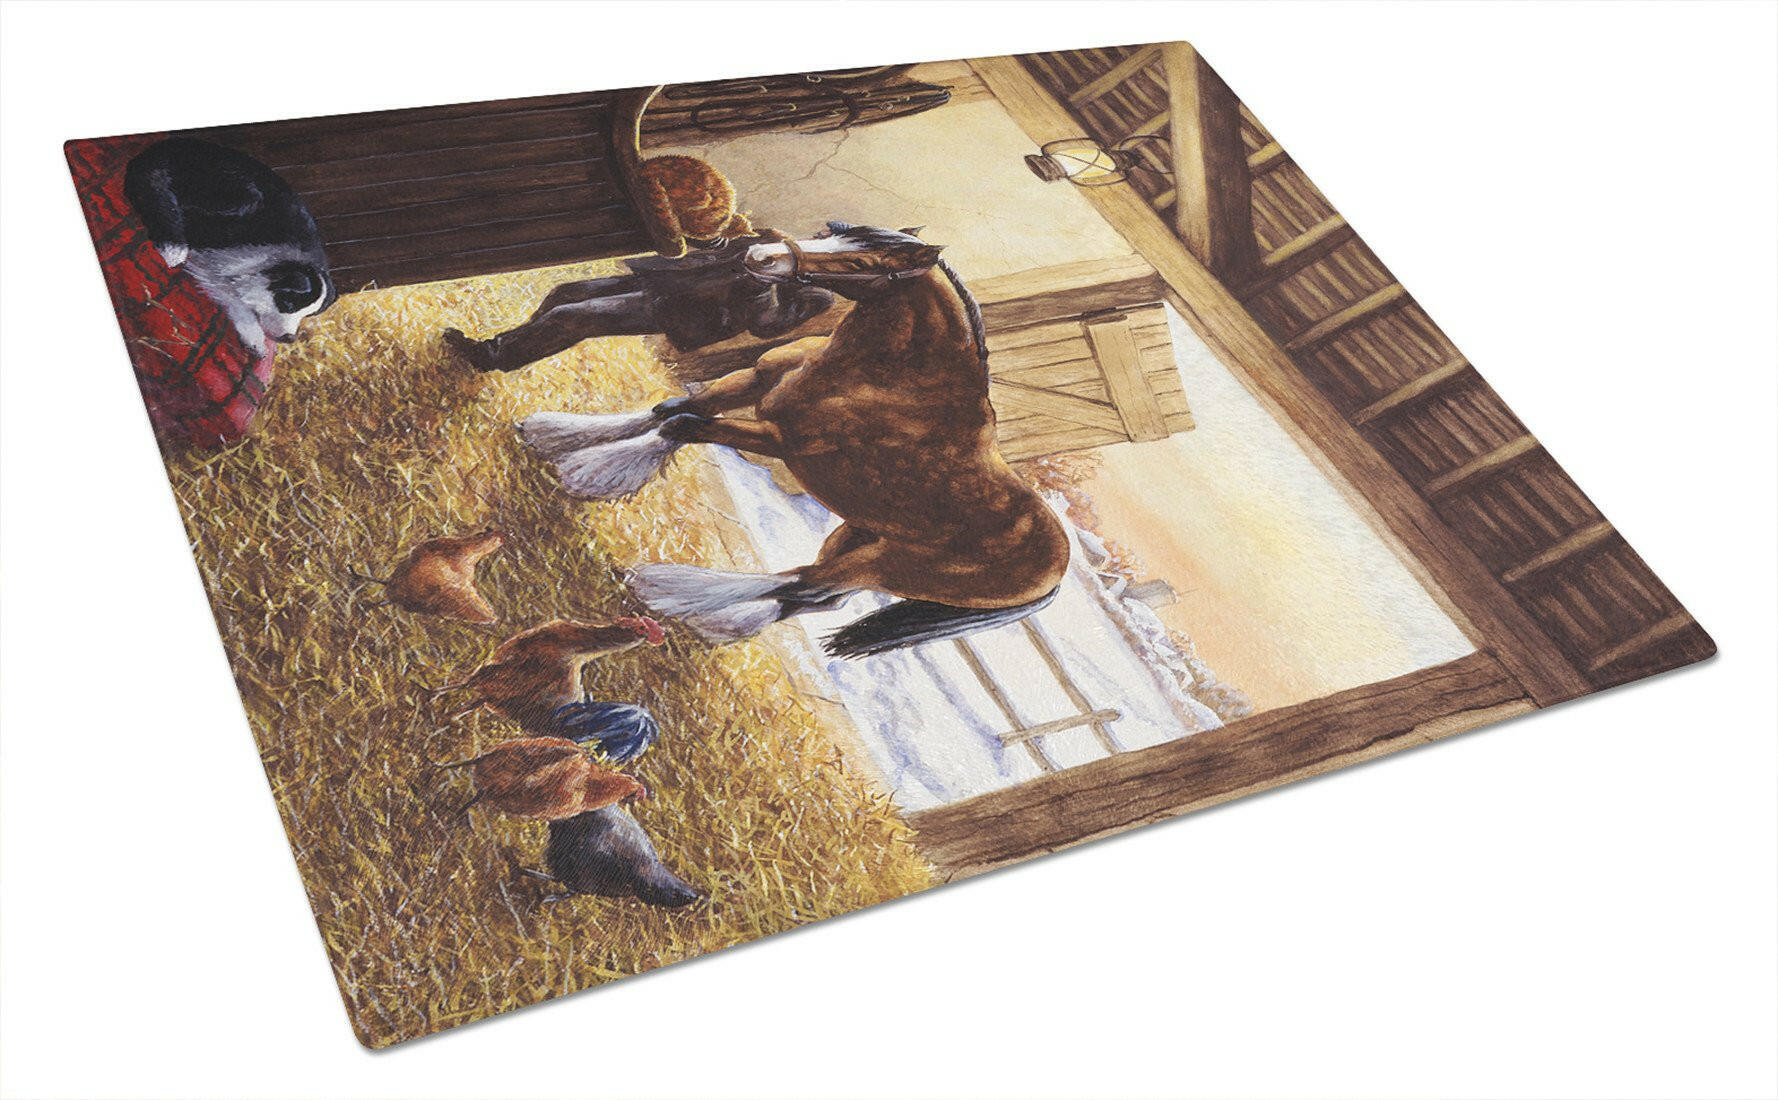 Cydesdale In The Stable Glass Cutting Board Large BDBA0291LCB by Caroline's Treasures